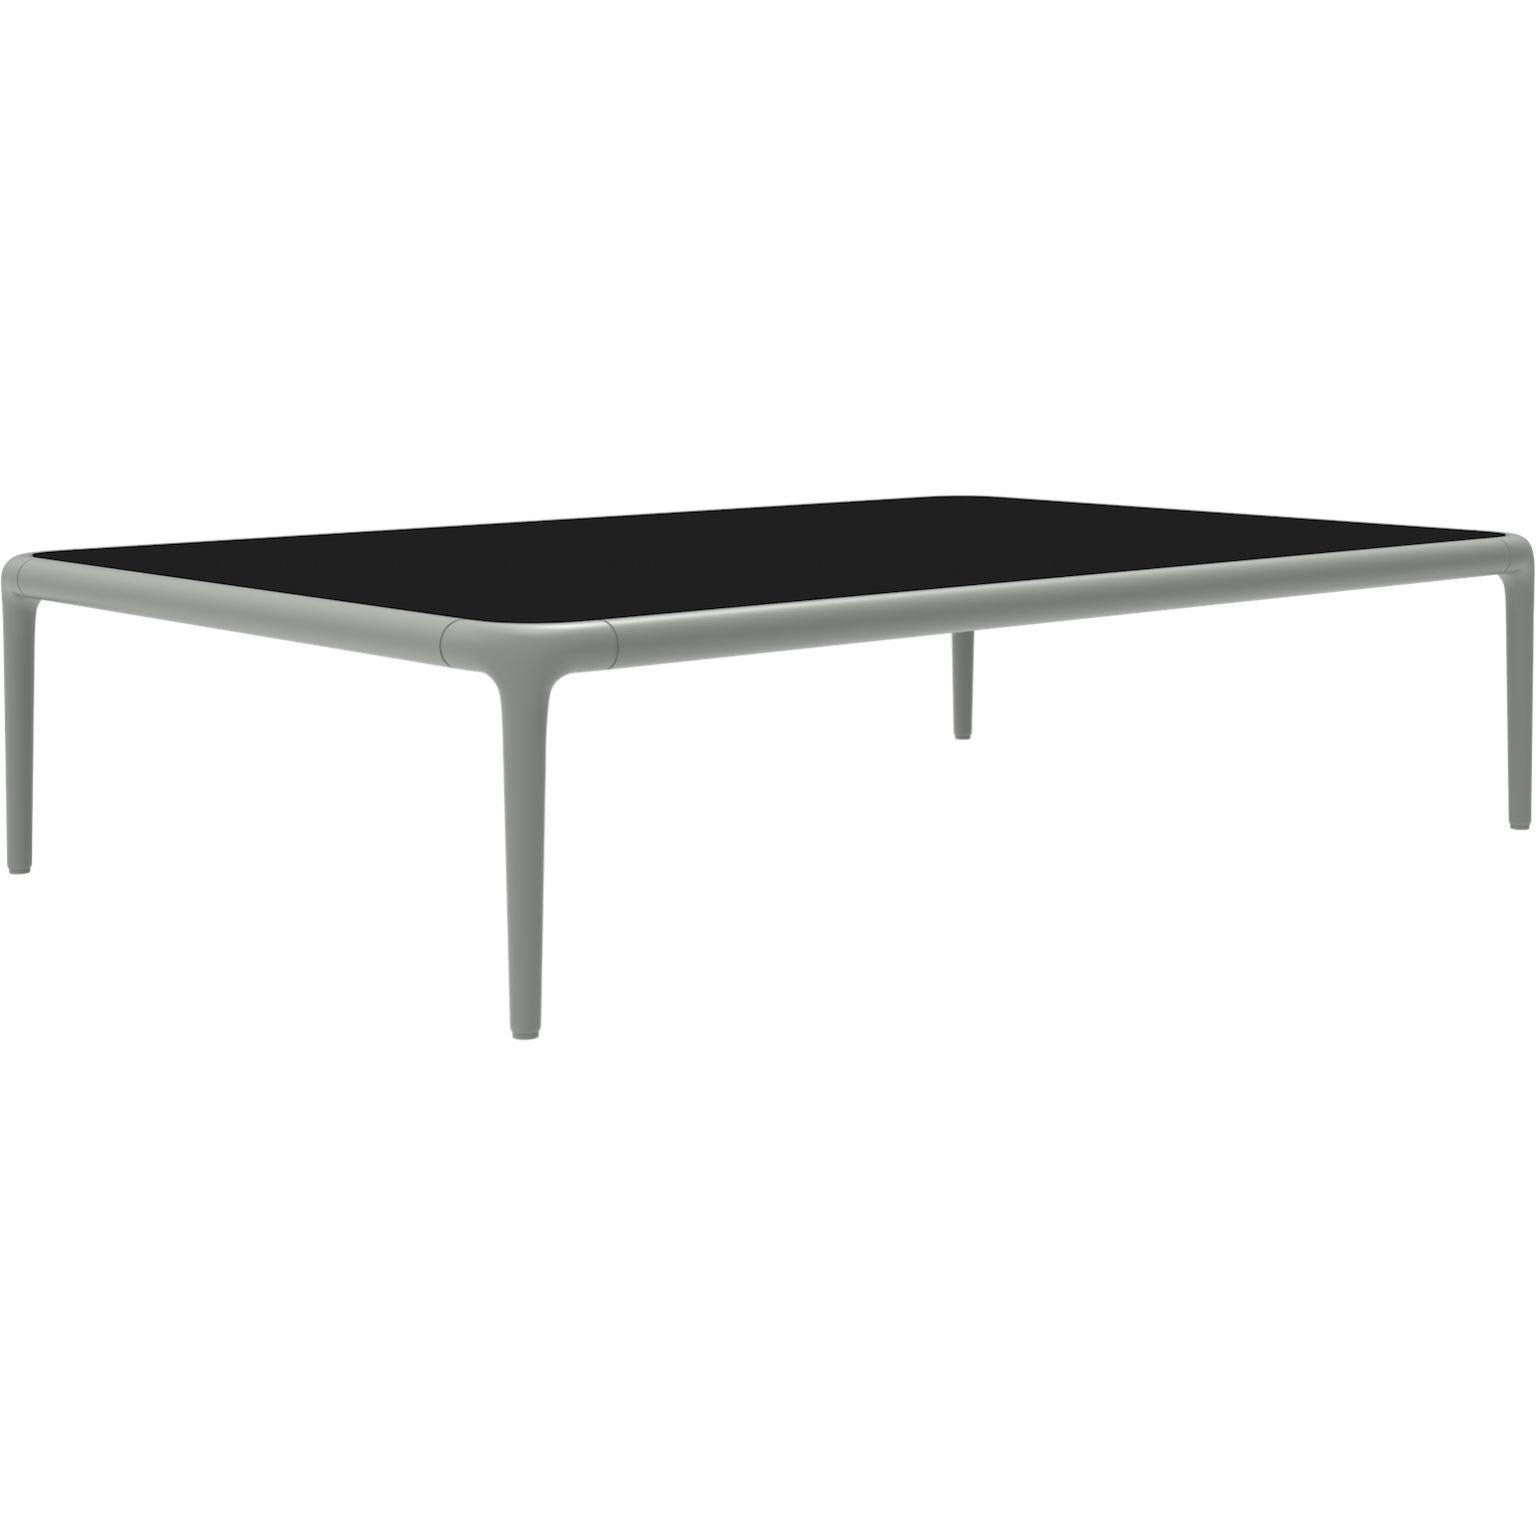 Xaloc silver coffee table 120 with glass top by Mowee.
Dimensions: D120 x W80 x H28 cm.
Materials: Aluminum, tinted tempered glass top.
Also available in different aluminum colors and finishes (HPL Black Edge or Neolith). 

Xaloc synthesizes